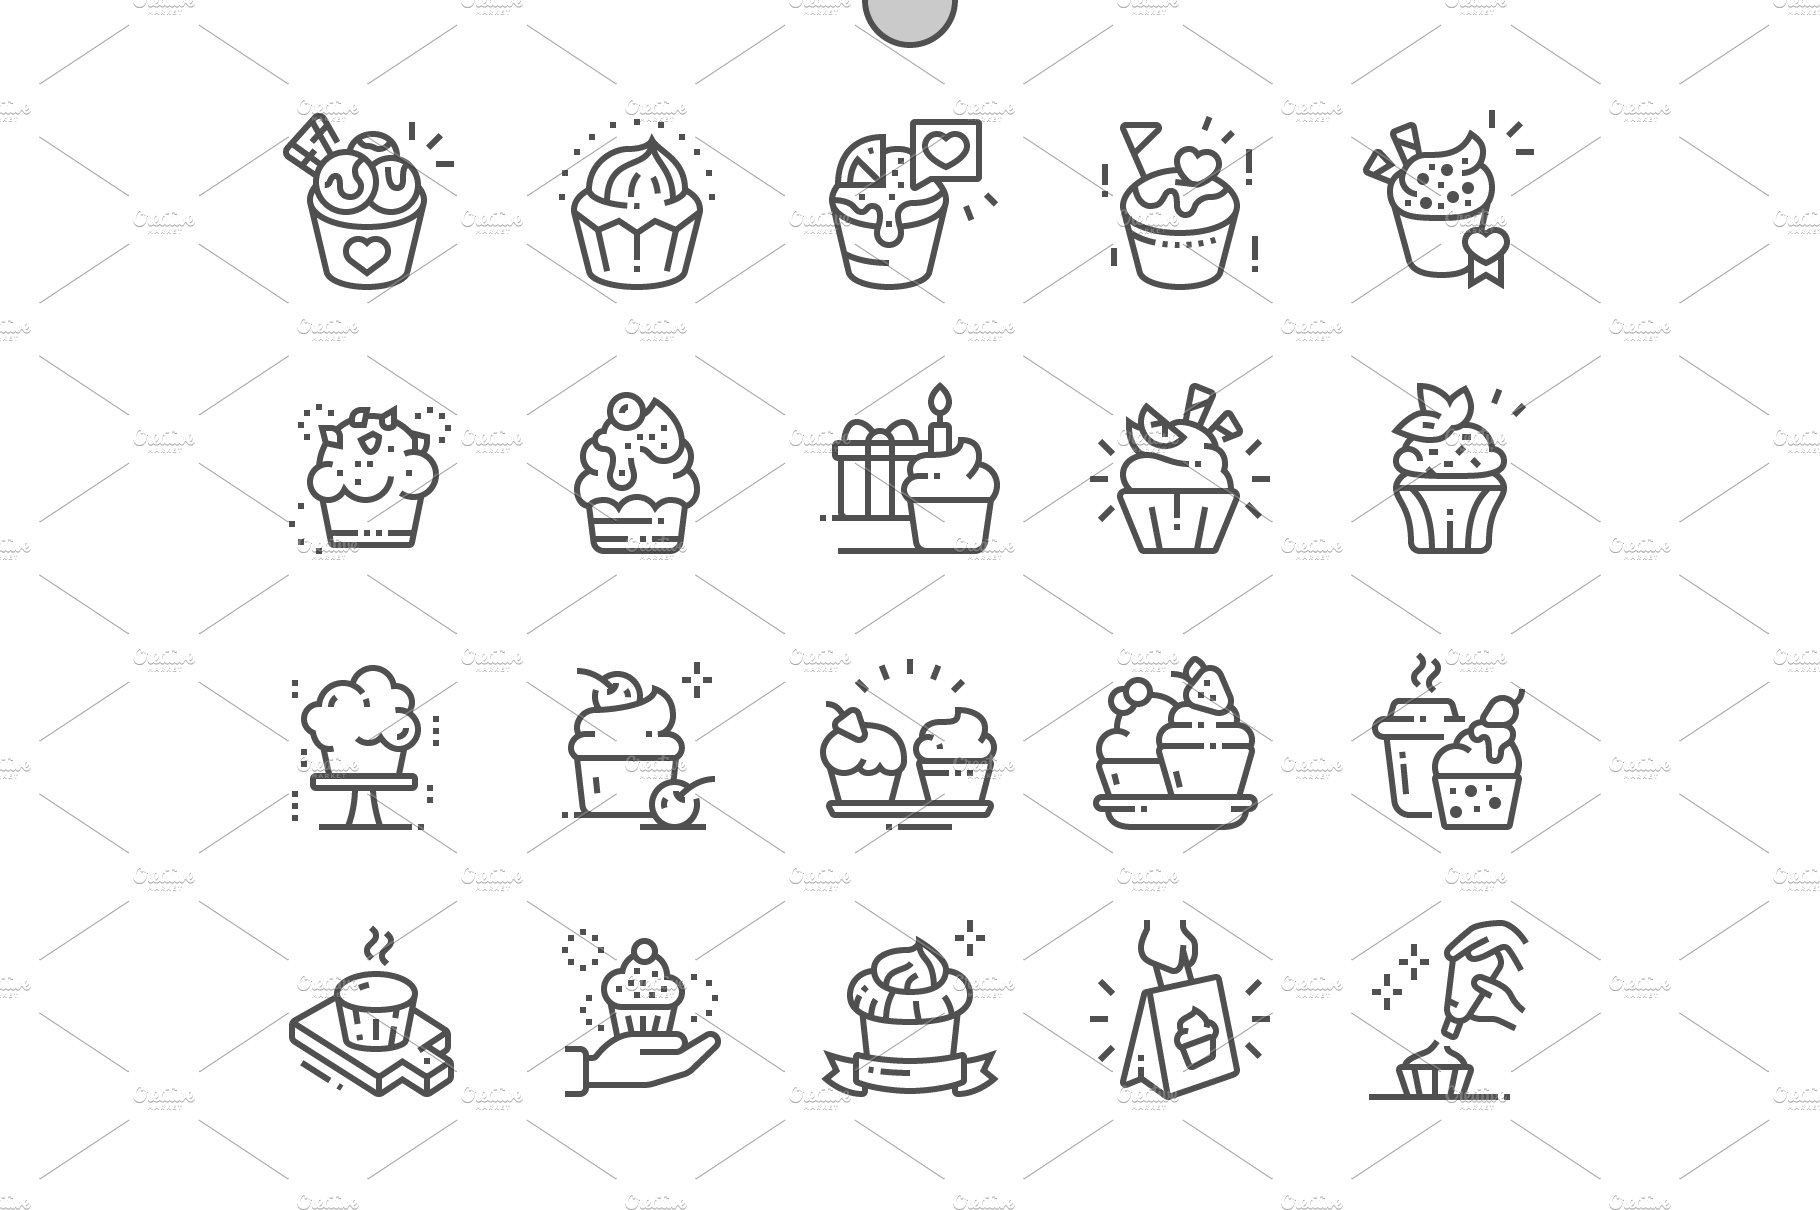 Cupcakes Line Icons cover image.